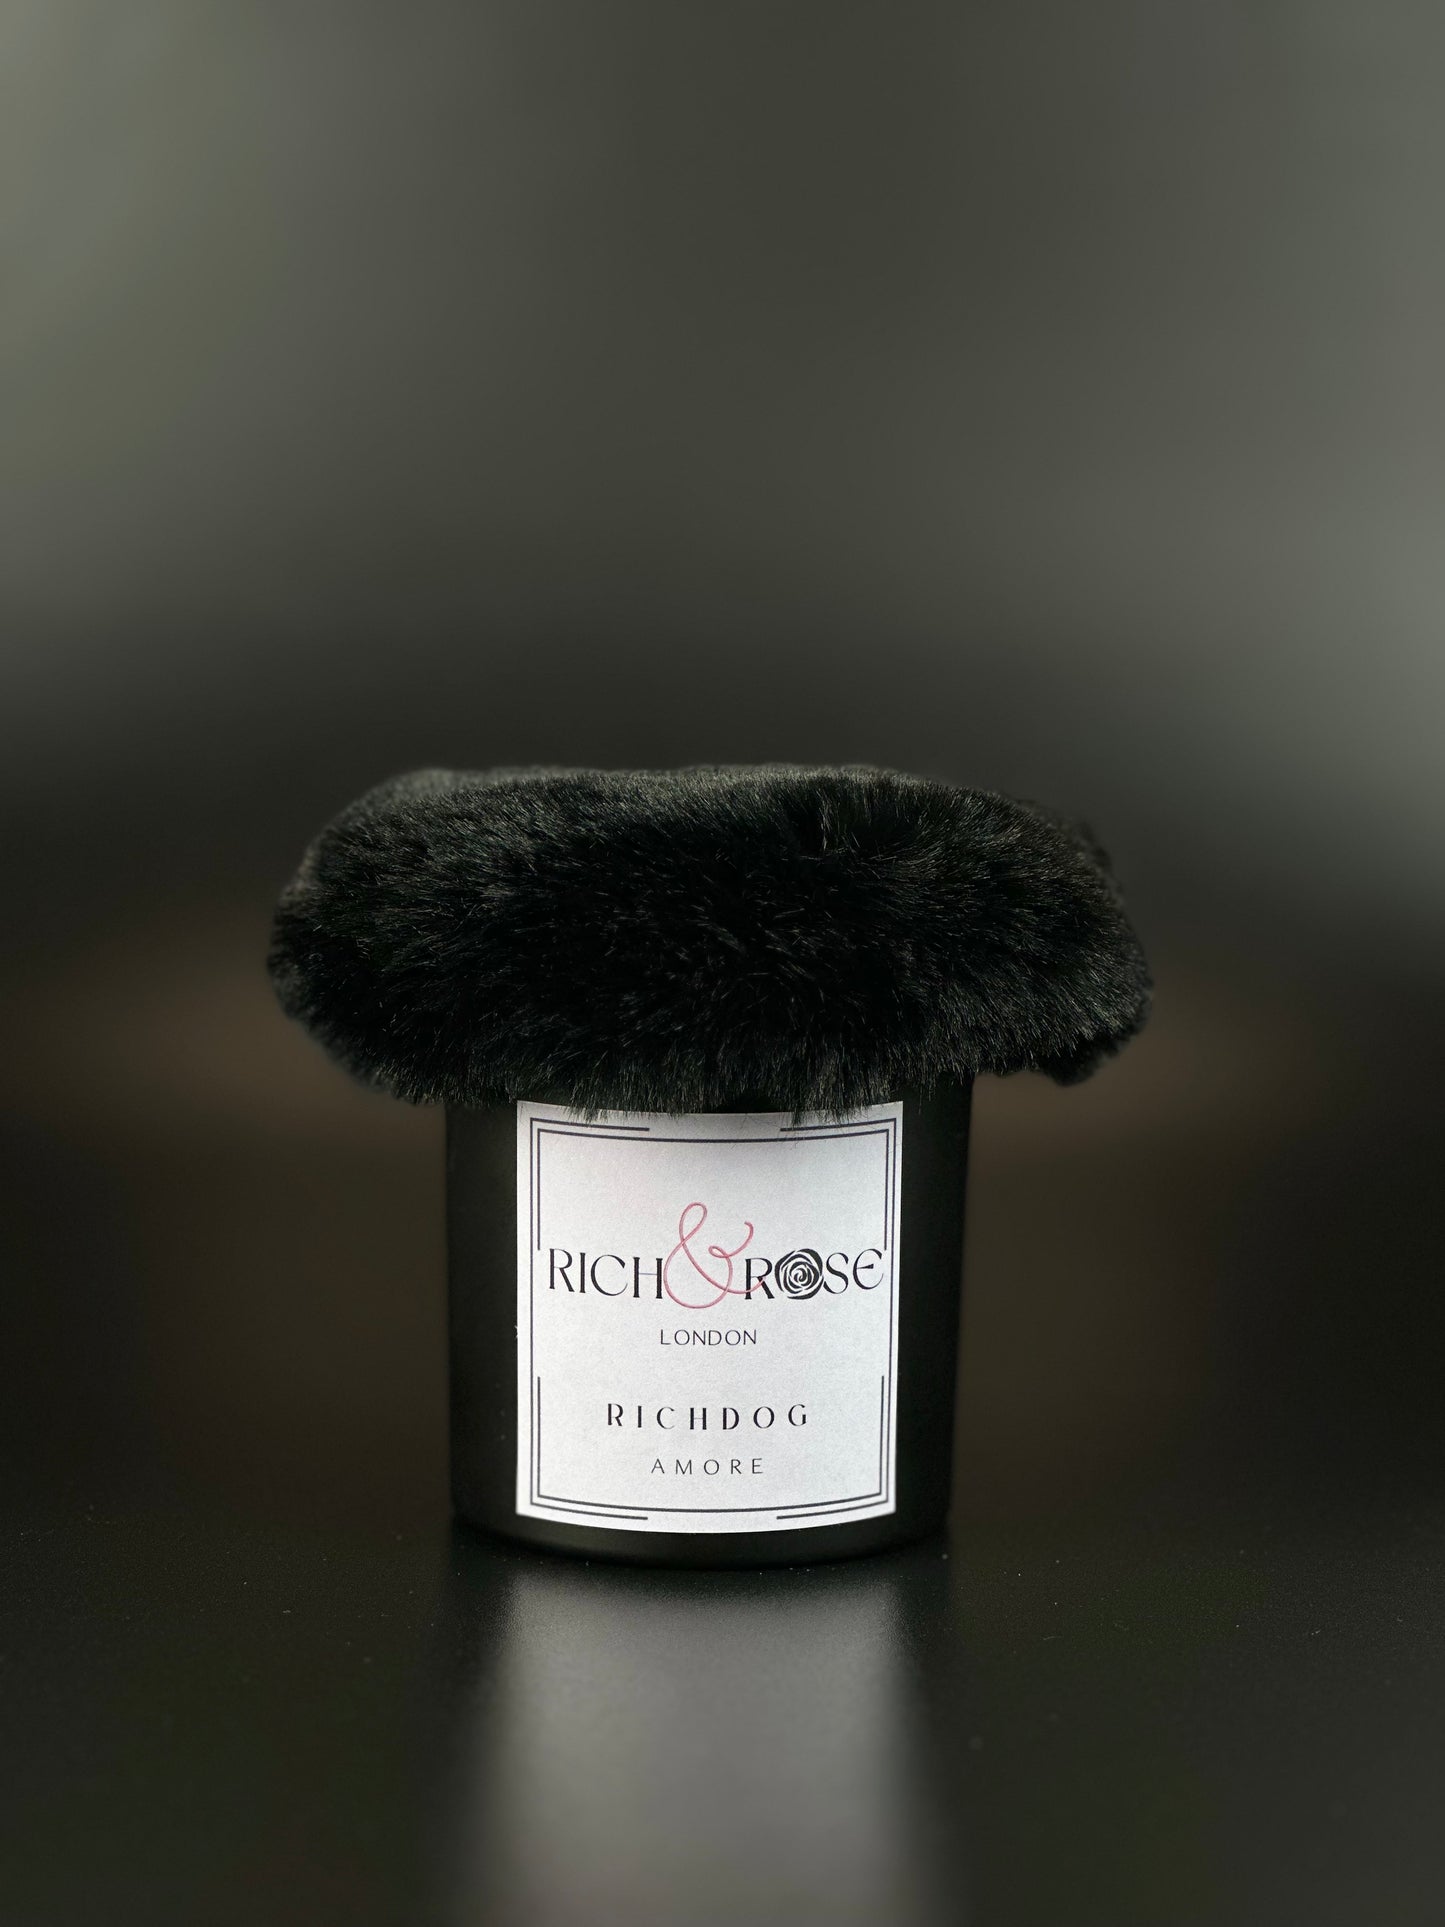 Fluffy gift, faux fur, lion gift, real fur, genuine fur, faux fur , faux fur centre piece, fur interiors, fur decor, faux fur decor, unique gifts for him, unusual gifts, vegan candle, fur gifts, faux fur gift, unique gifts for her ,wolf candle , Beowulf fur, white wolf, fluffy decor, fluffy candle, fluffy interiors.luxury London, London gifts, faux fur gifts, handmade luxury, Dog candle, dog fur, fur ball,